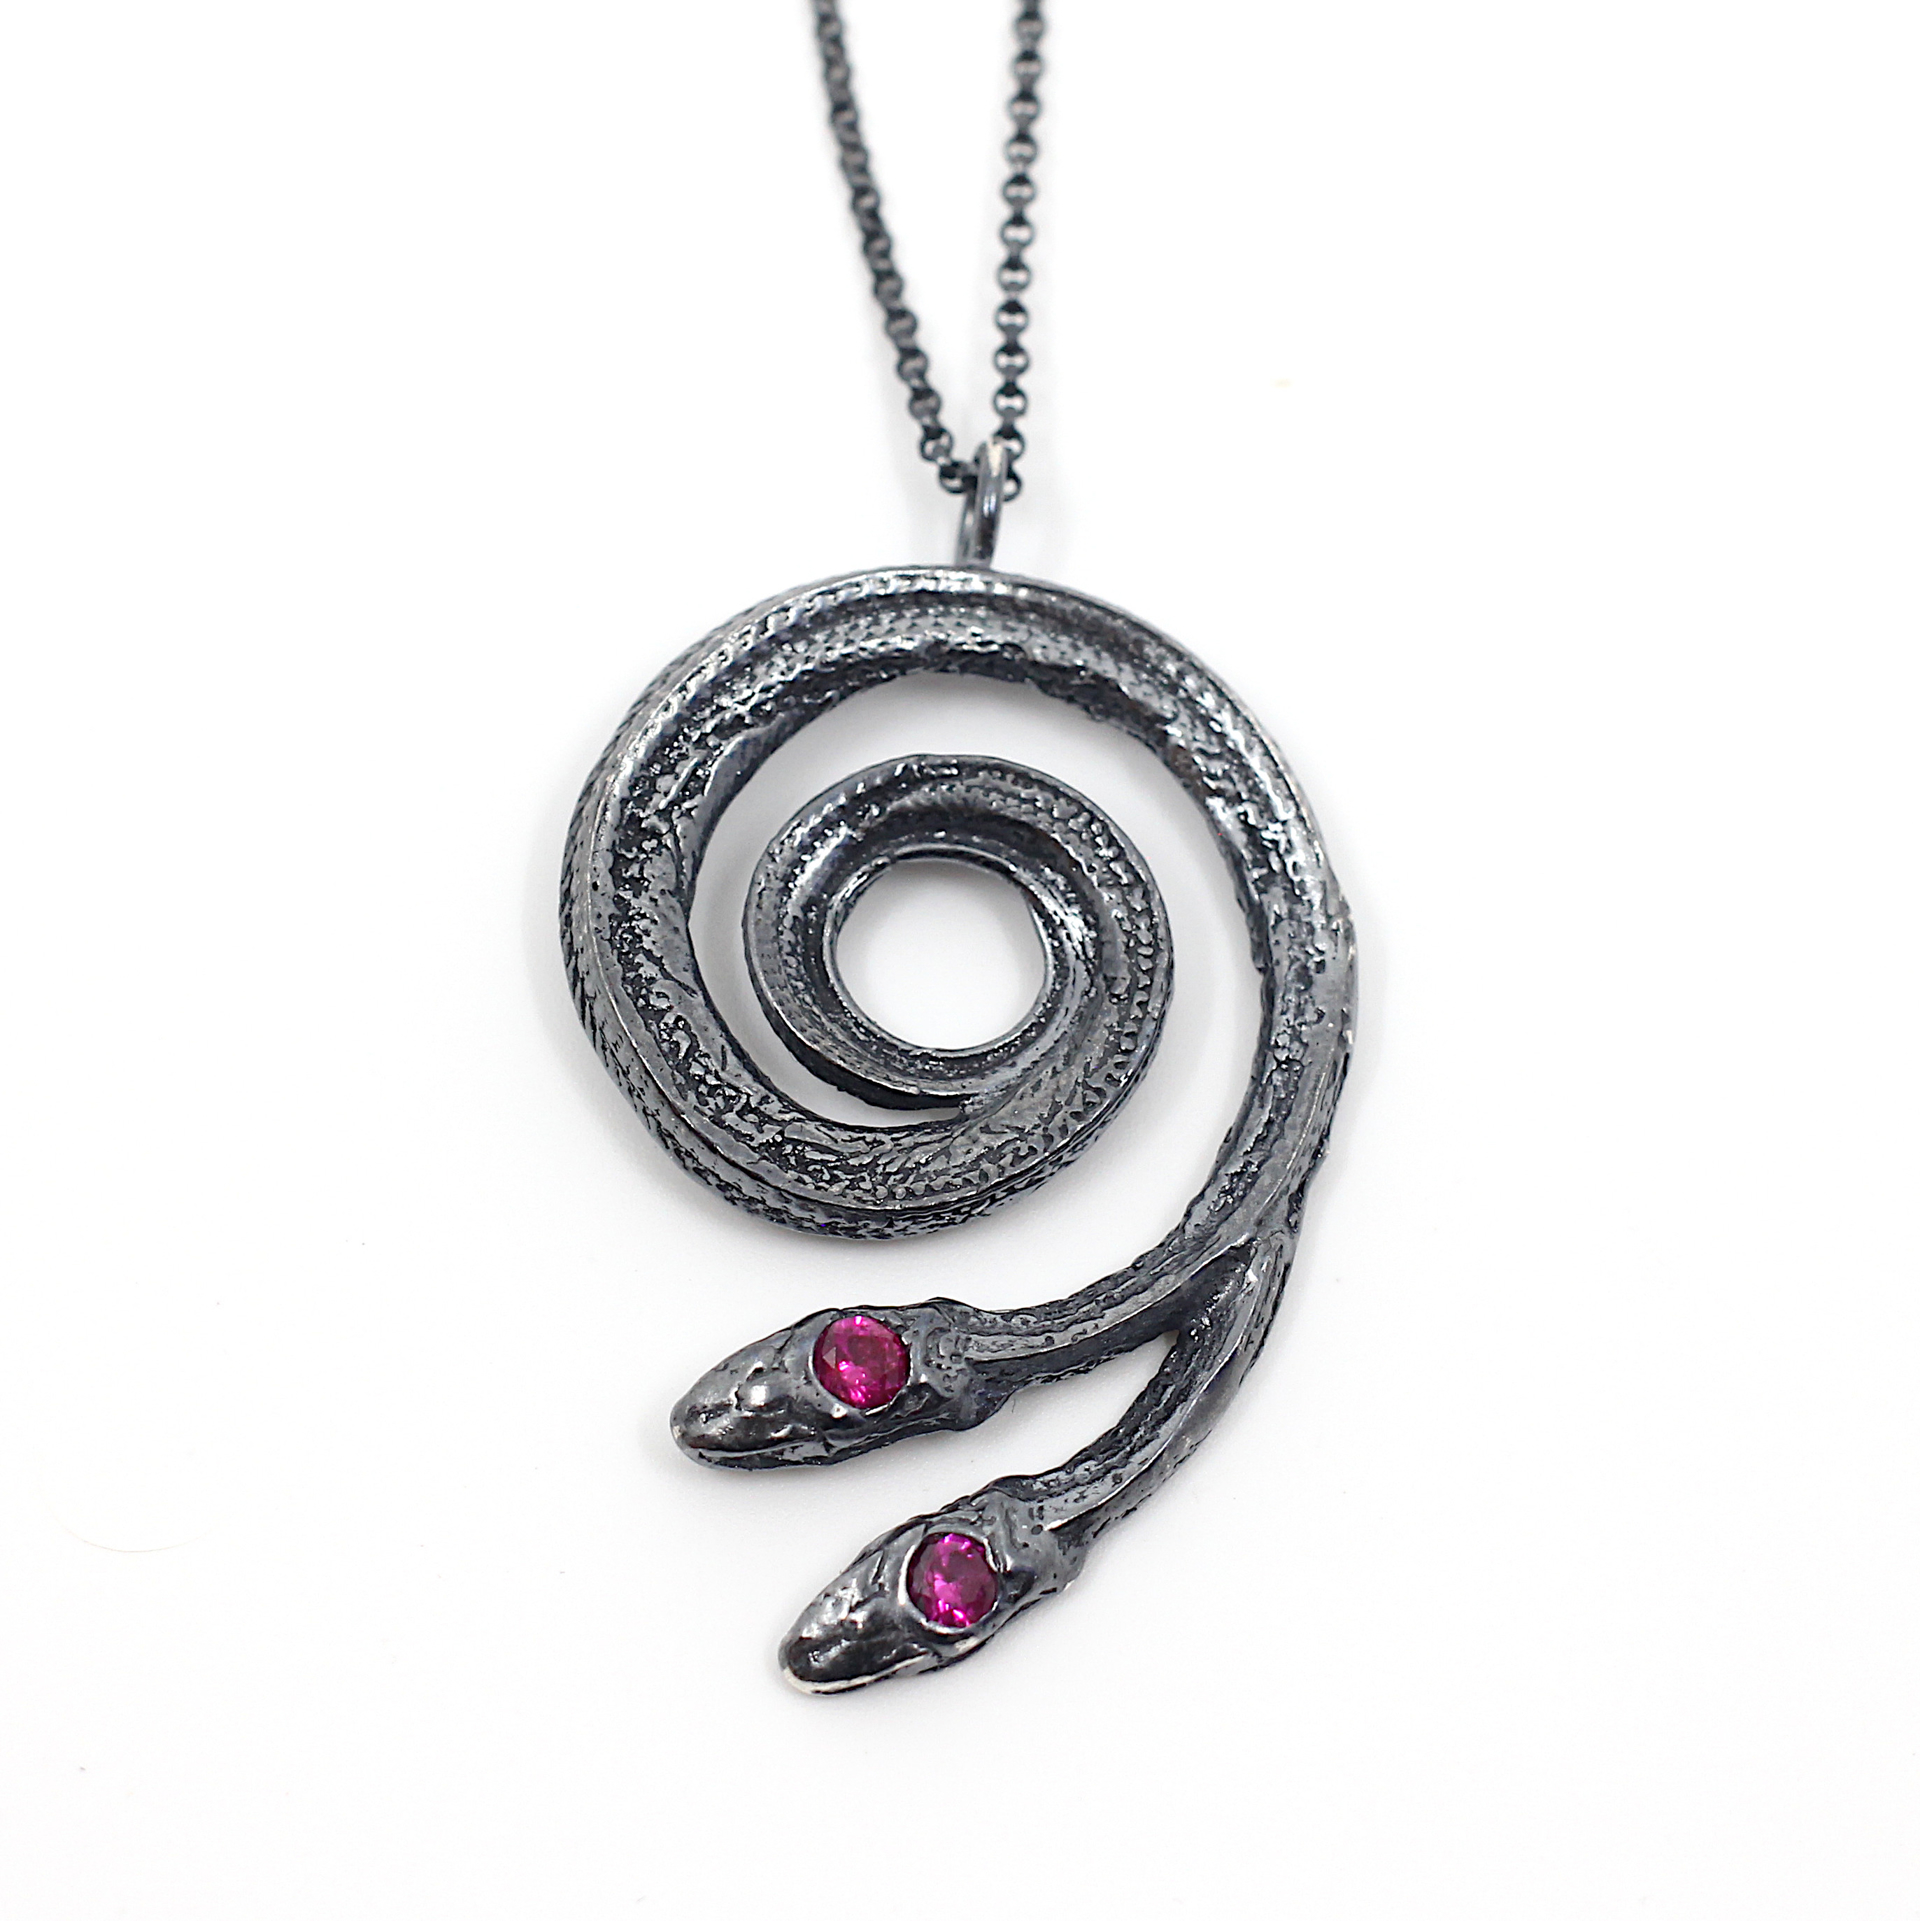 Two-headed Ruby Serpentine Necklace by Anna Johnson